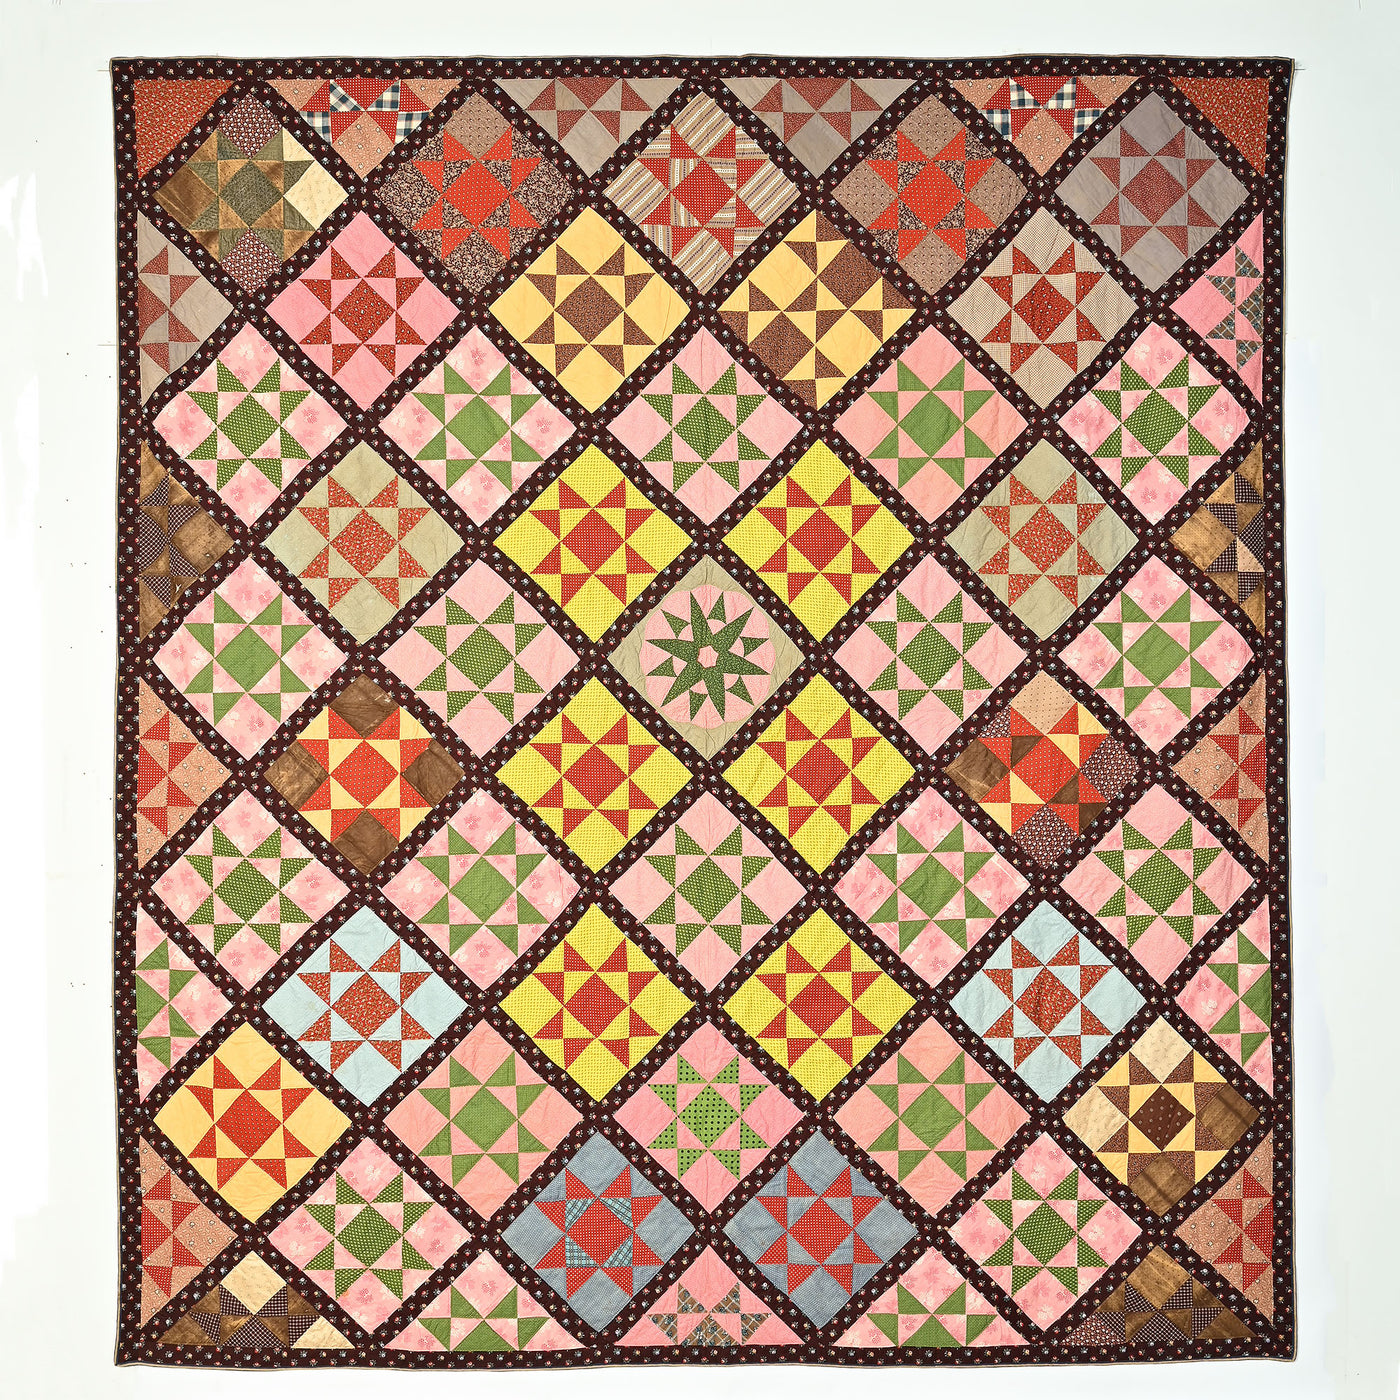 Ohio Stars Quilt with Compass Center